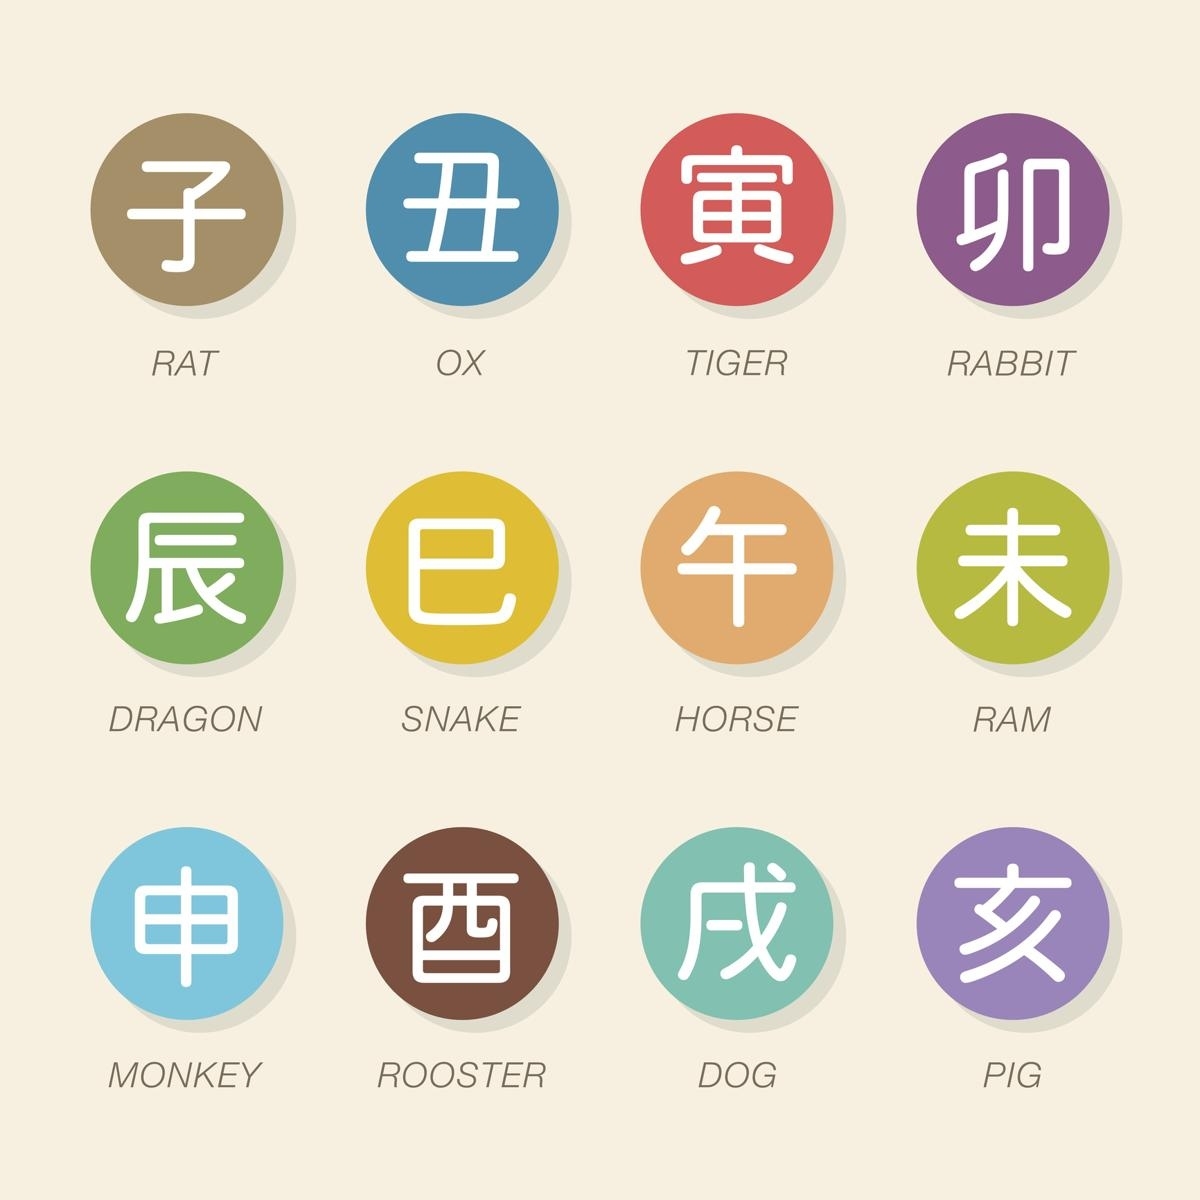 Everything You Need To Know About The Japanese Zodiac Signs Japanese Calendar Zodiac Signs